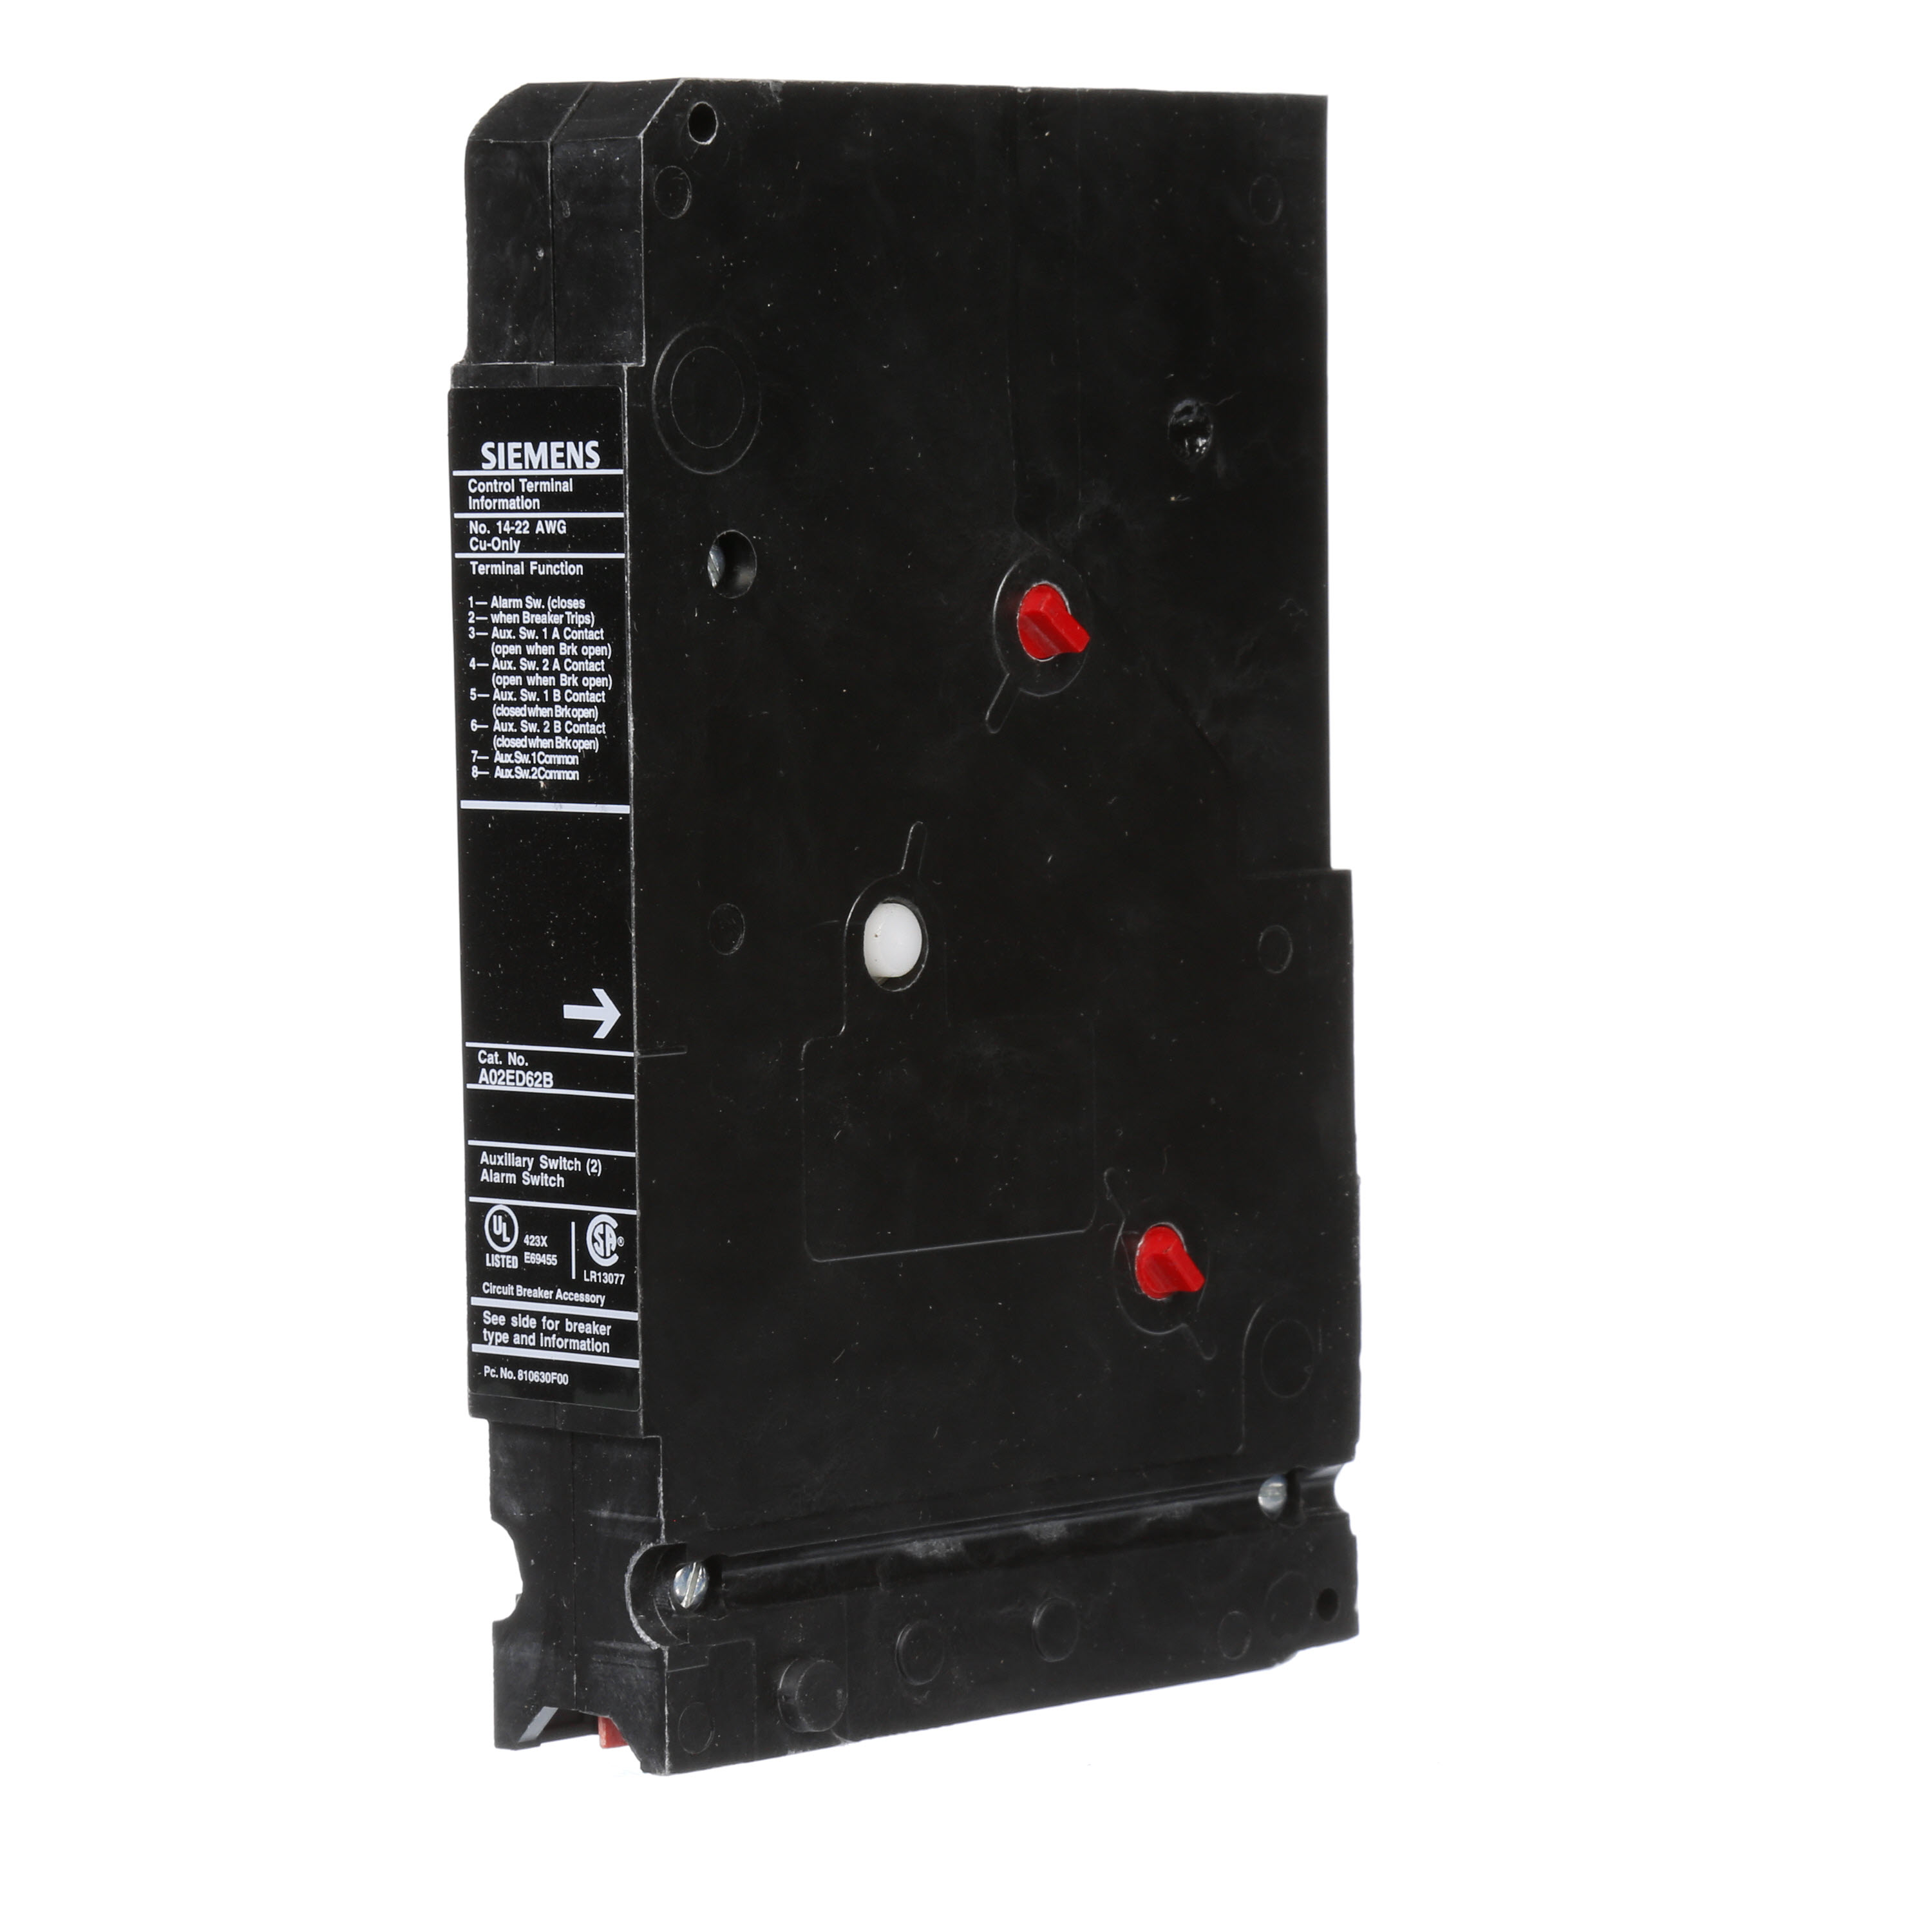 SIEMENS LOW VOLTAGE SENTRON MOLDED CASE CIRCUIT BREAKER INTERNAL ACCESSORY. 240VAC BELL ALARM COMBINATION WITH TWO FORM C 240 VAC A UXILIARY SWITCH (1NO / 1NC). SUITS ED FRAME BREAKERS.